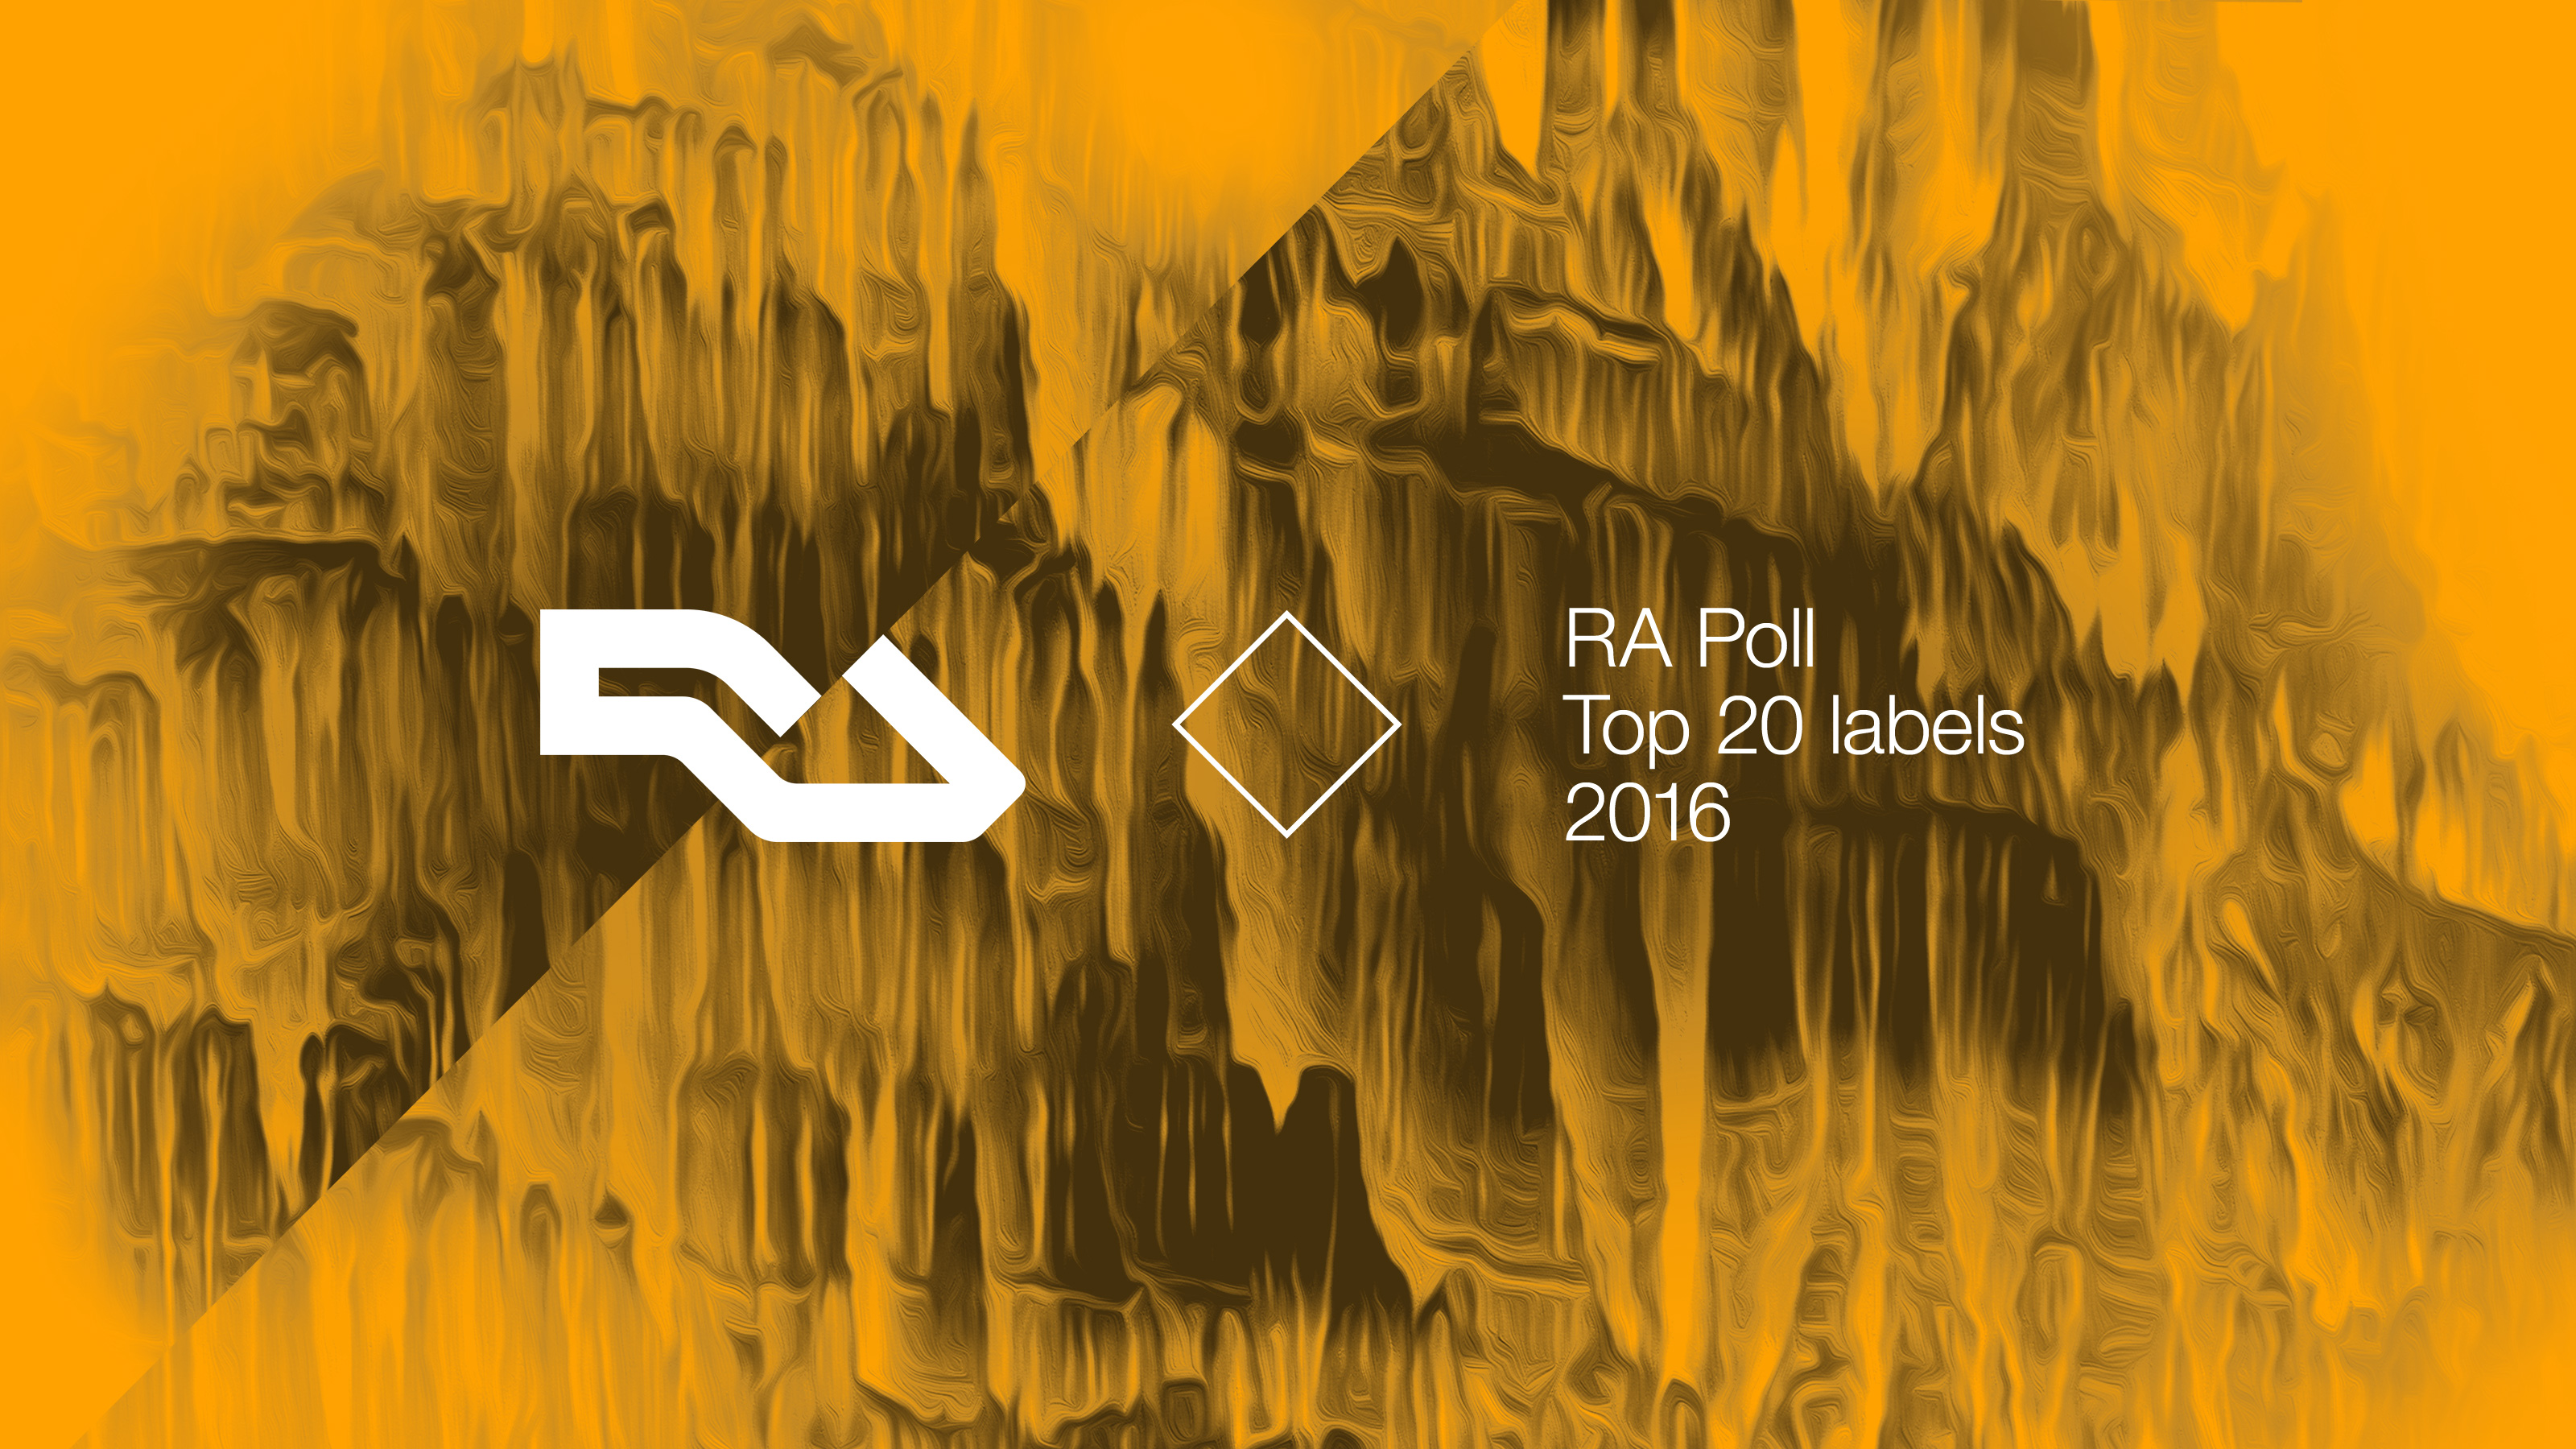 RA Poll: Top 20 labels of 2016